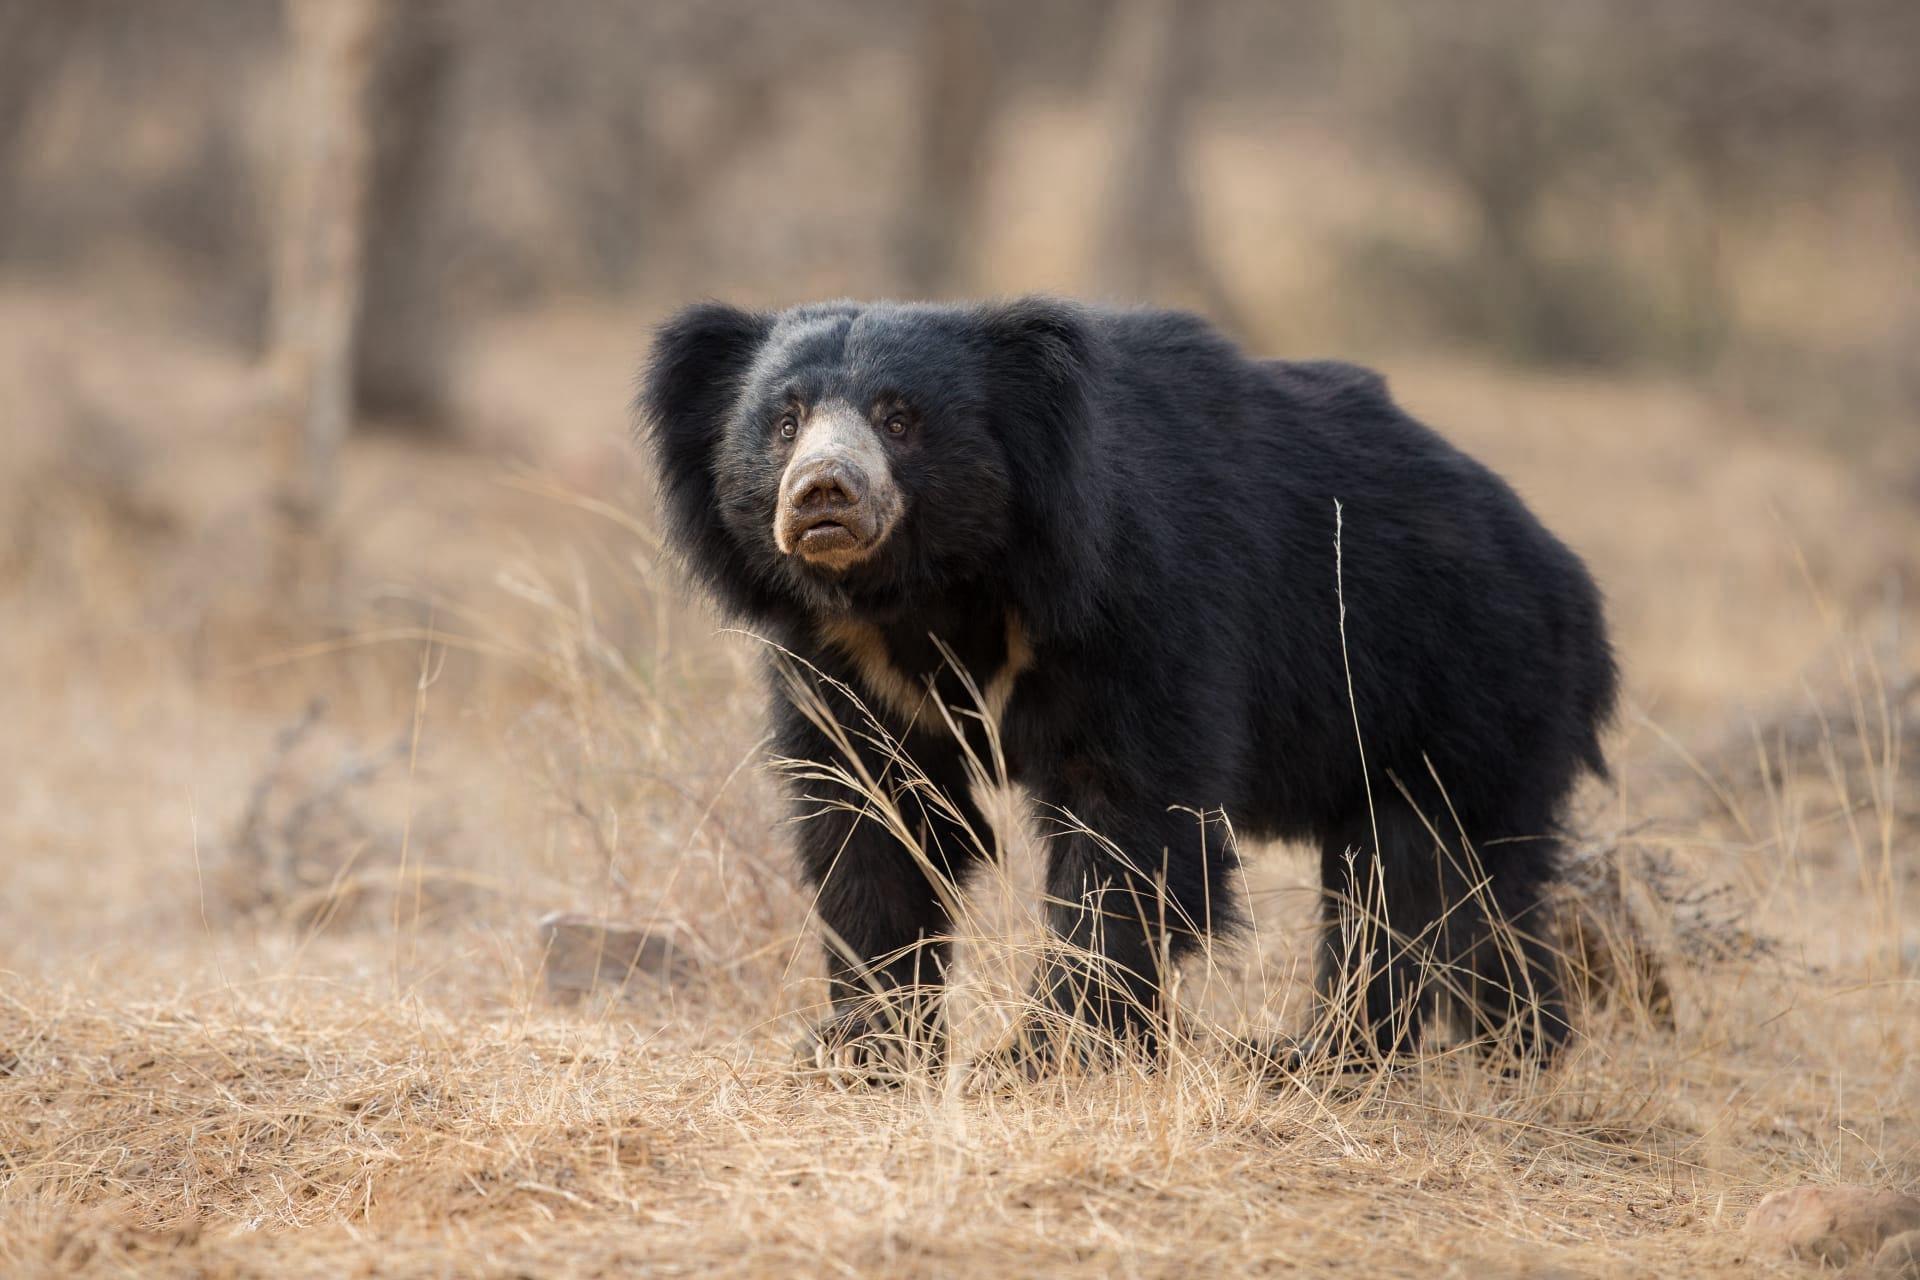 Sloth bear pictures